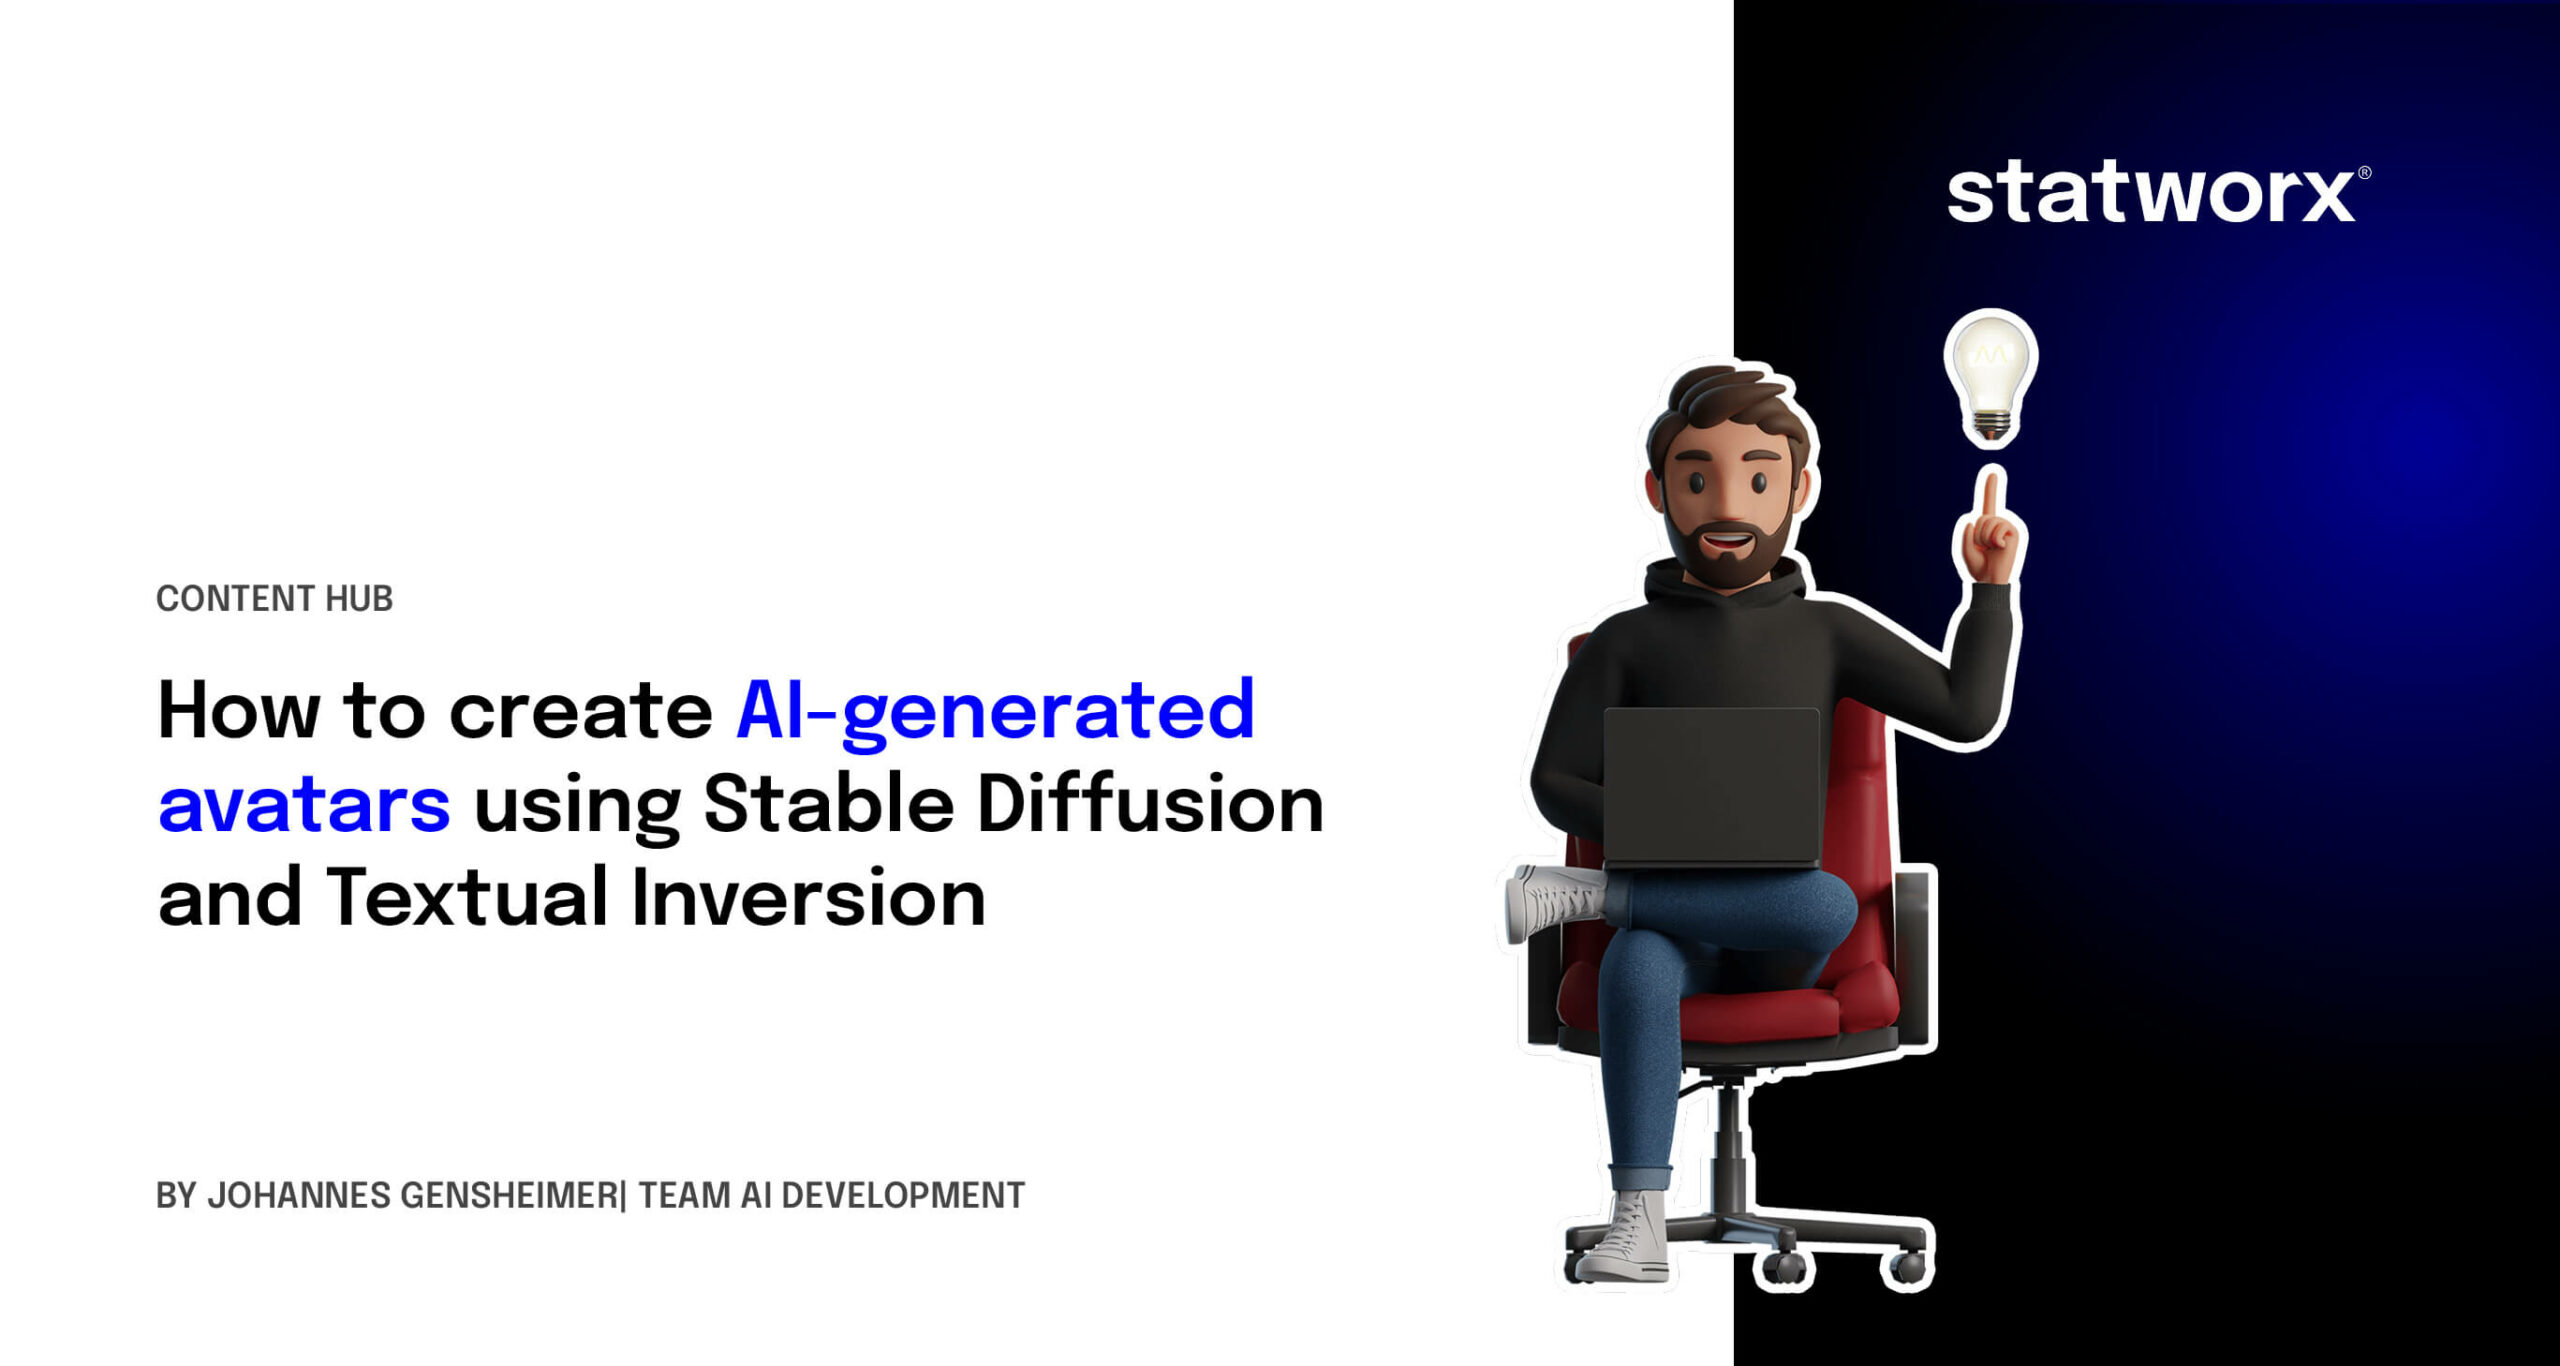 How to create AI-generated avatars using Stable Diffusion and Textual Inversion